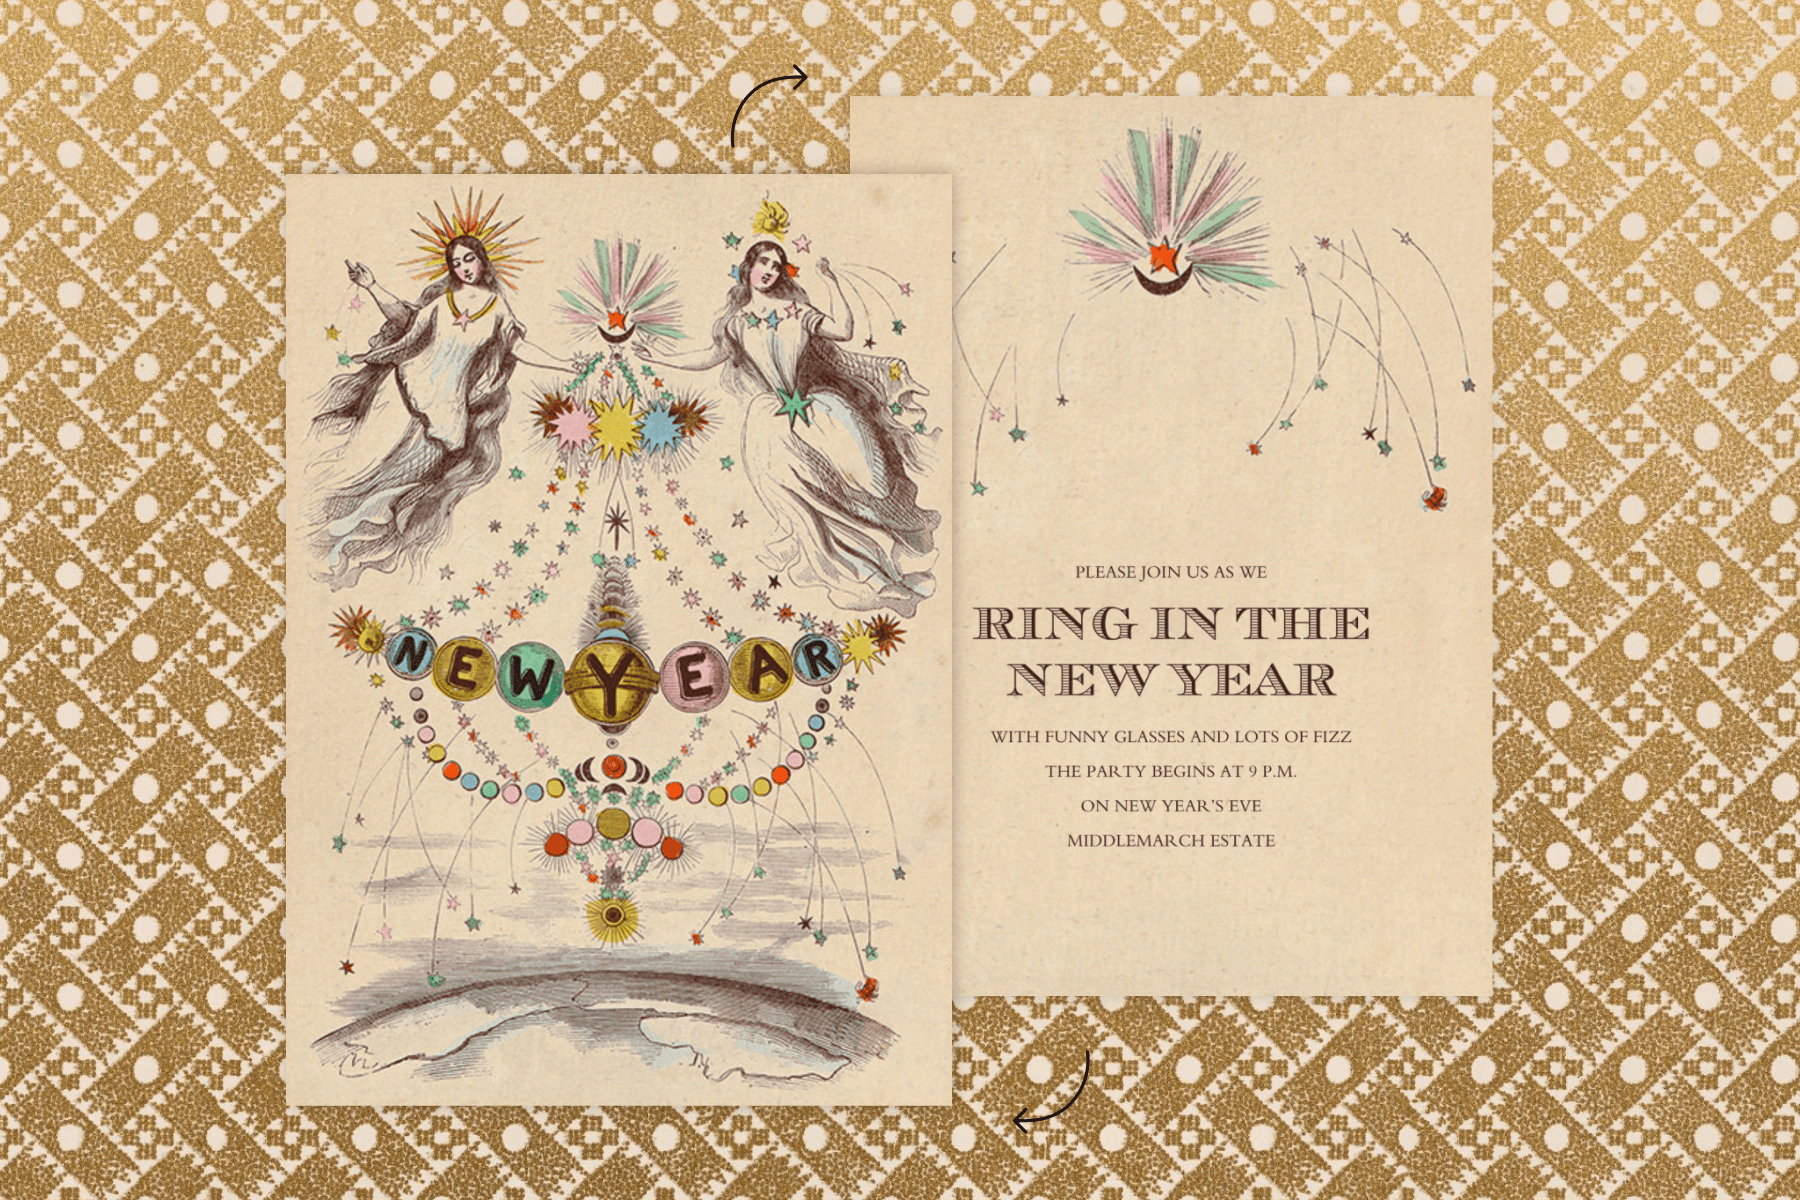 An invitation with two angels floating above colorful ornaments that spell out “NEW YEAR,” plus the flip side with party details.